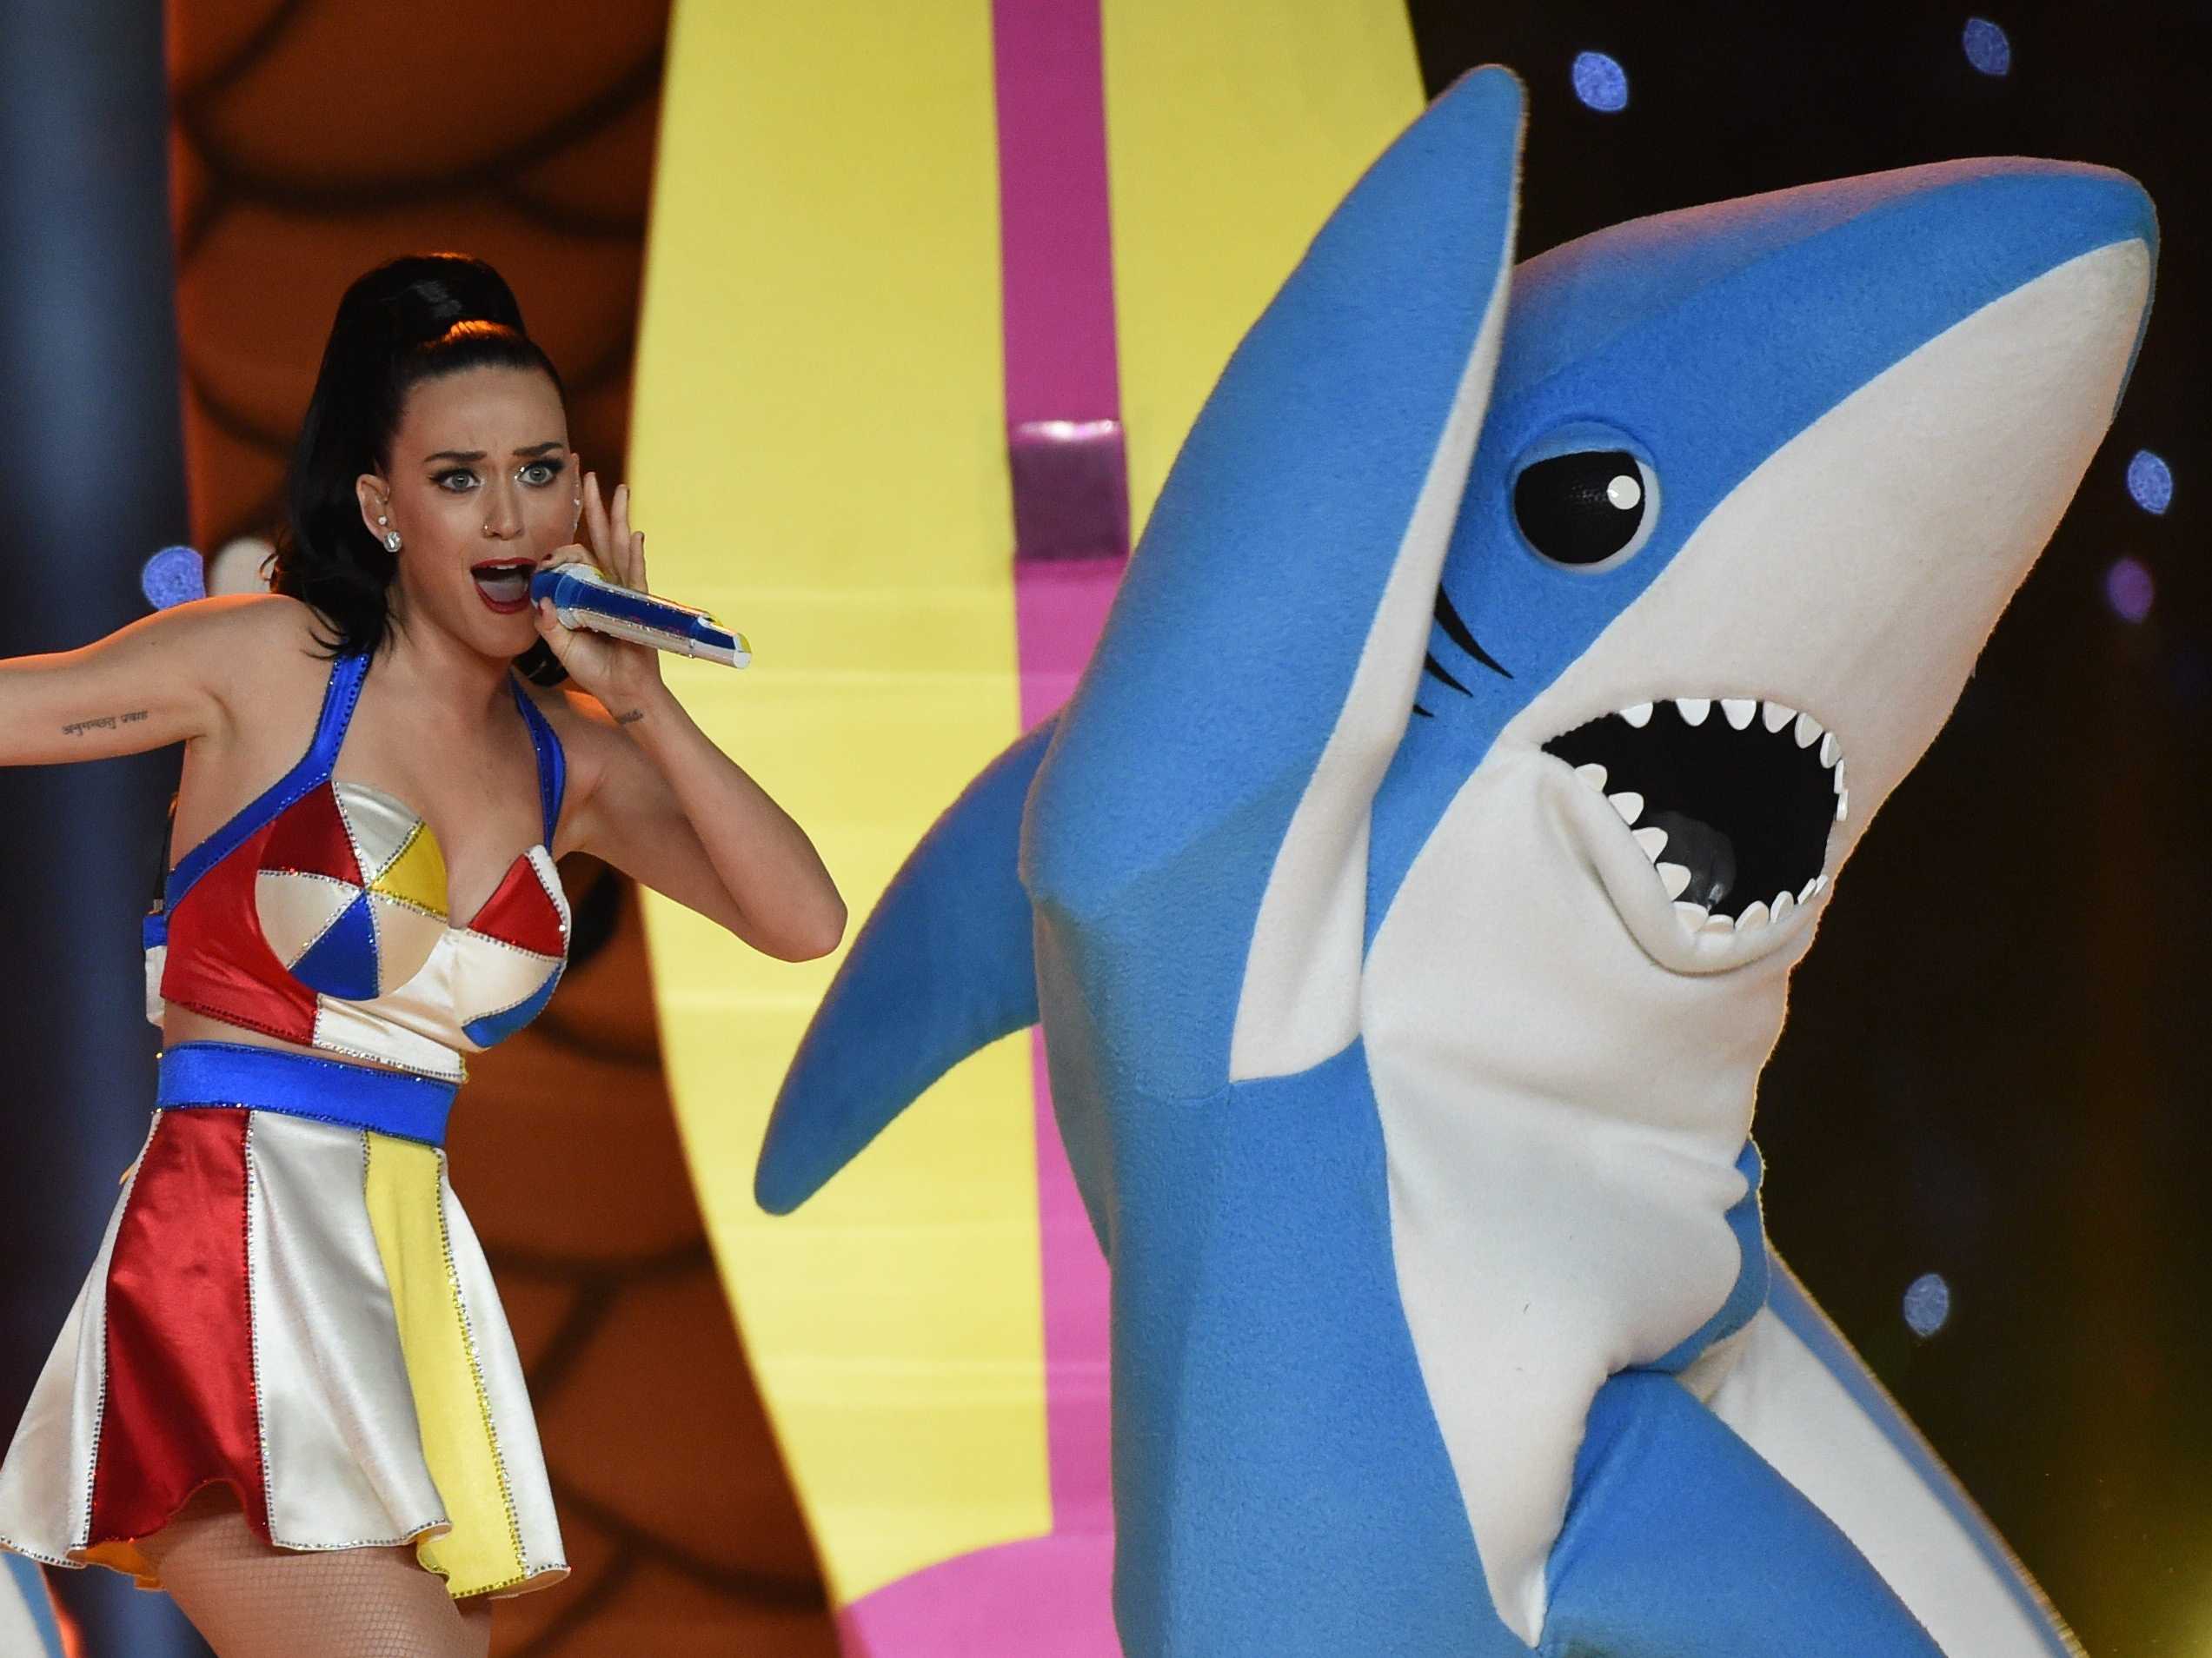 one-of-katy-perrys-dancing-sharks-reveals-his-identity-during-a-reddit-ama